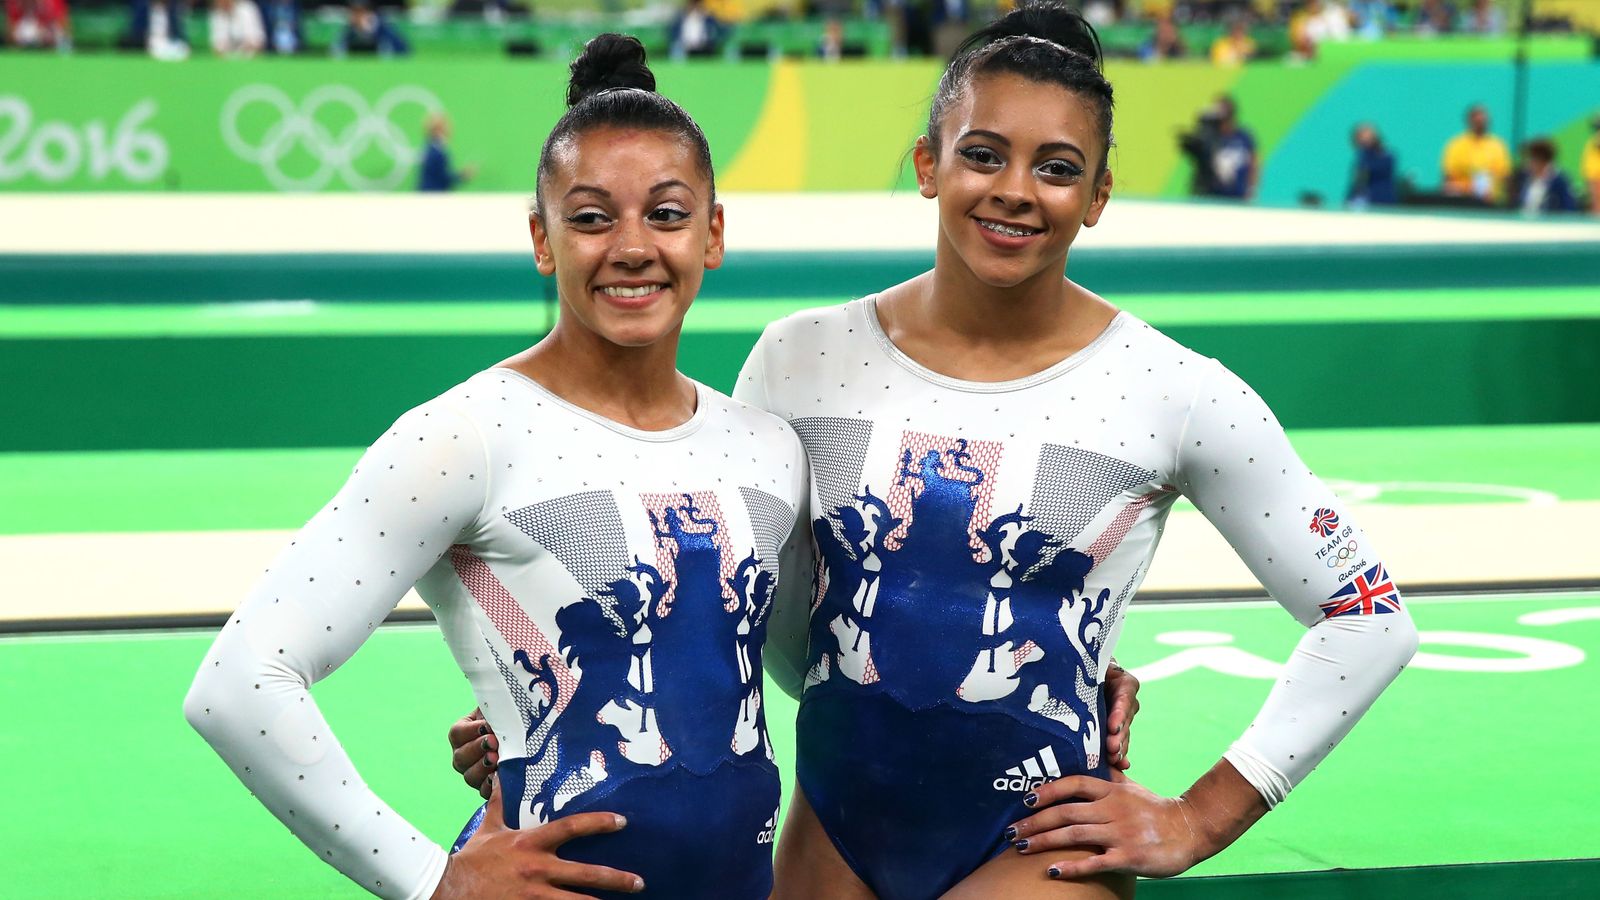 Team GB gymnasts Becky and Ellie Downie targeting Olympic Games gold in